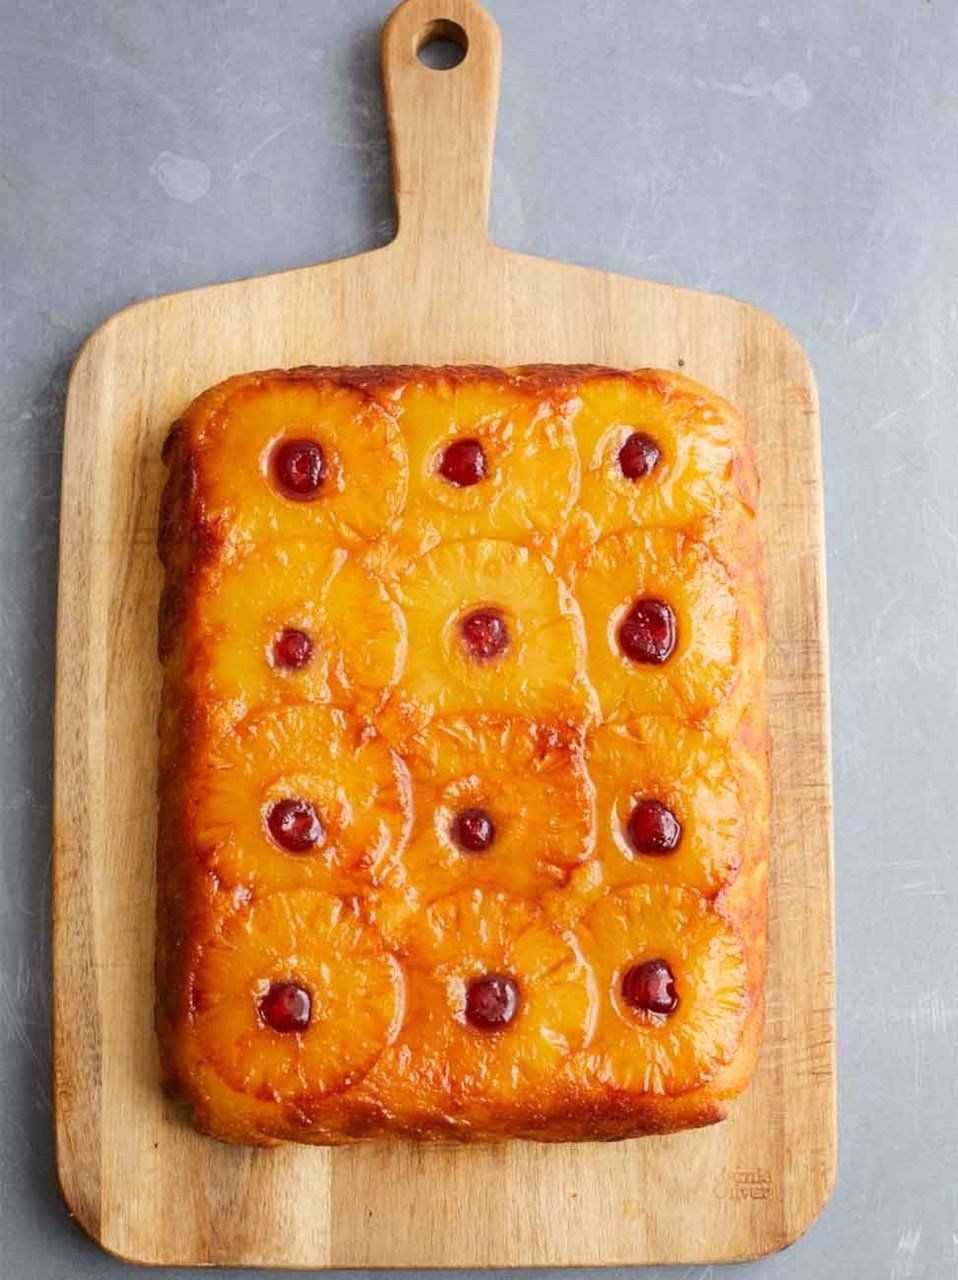 Caramel and apple upside-down cake